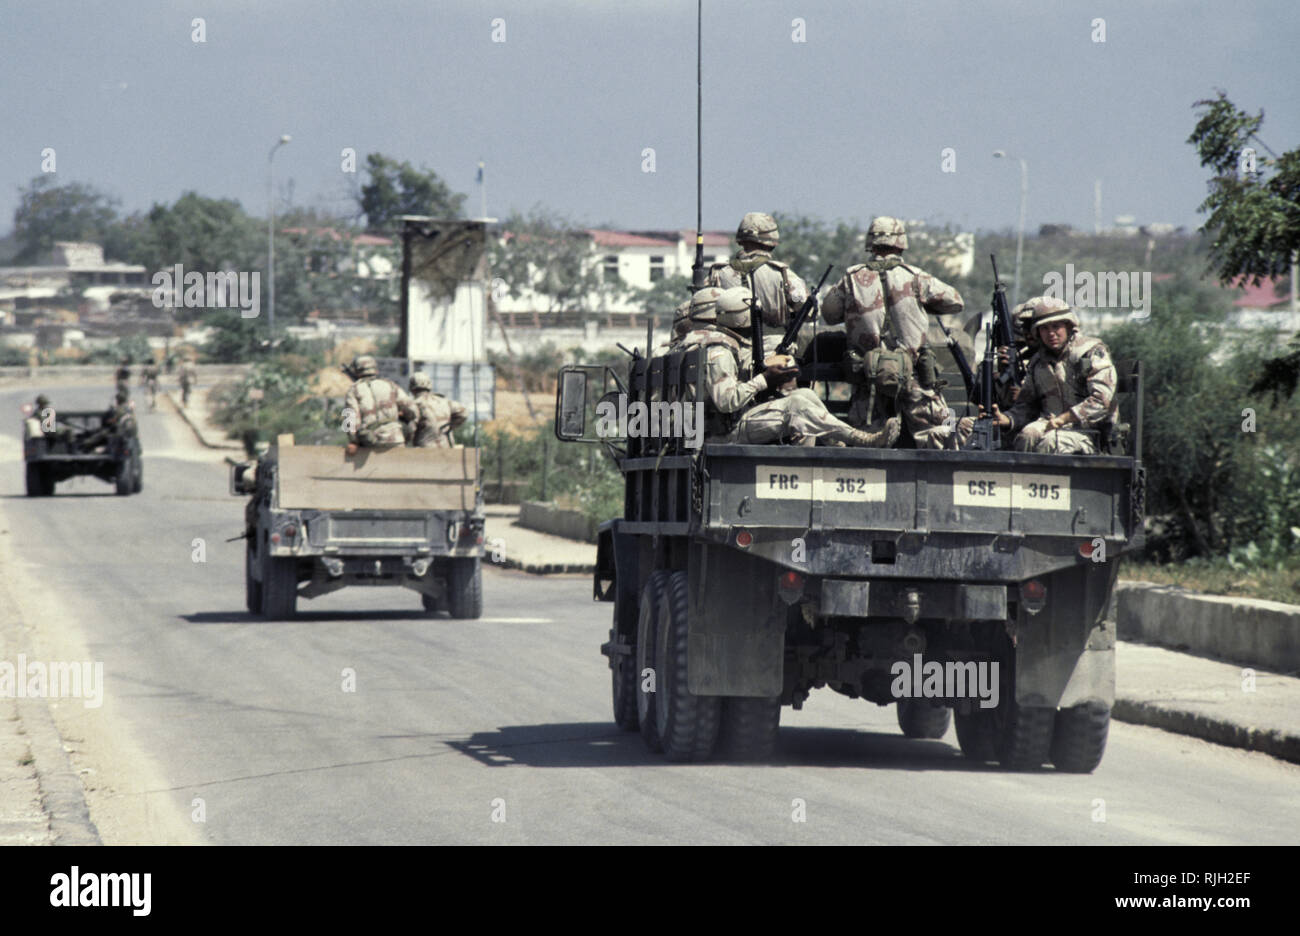 16th October 1993 Leaving UNOSOM Headquarters, U.S. Army infantry soldiers of C Company 1/87 head out onto the streets of Mogadishu, Somalia in the back of an M35 truck. A couple of Humvees lead the convoy. Stock Photo